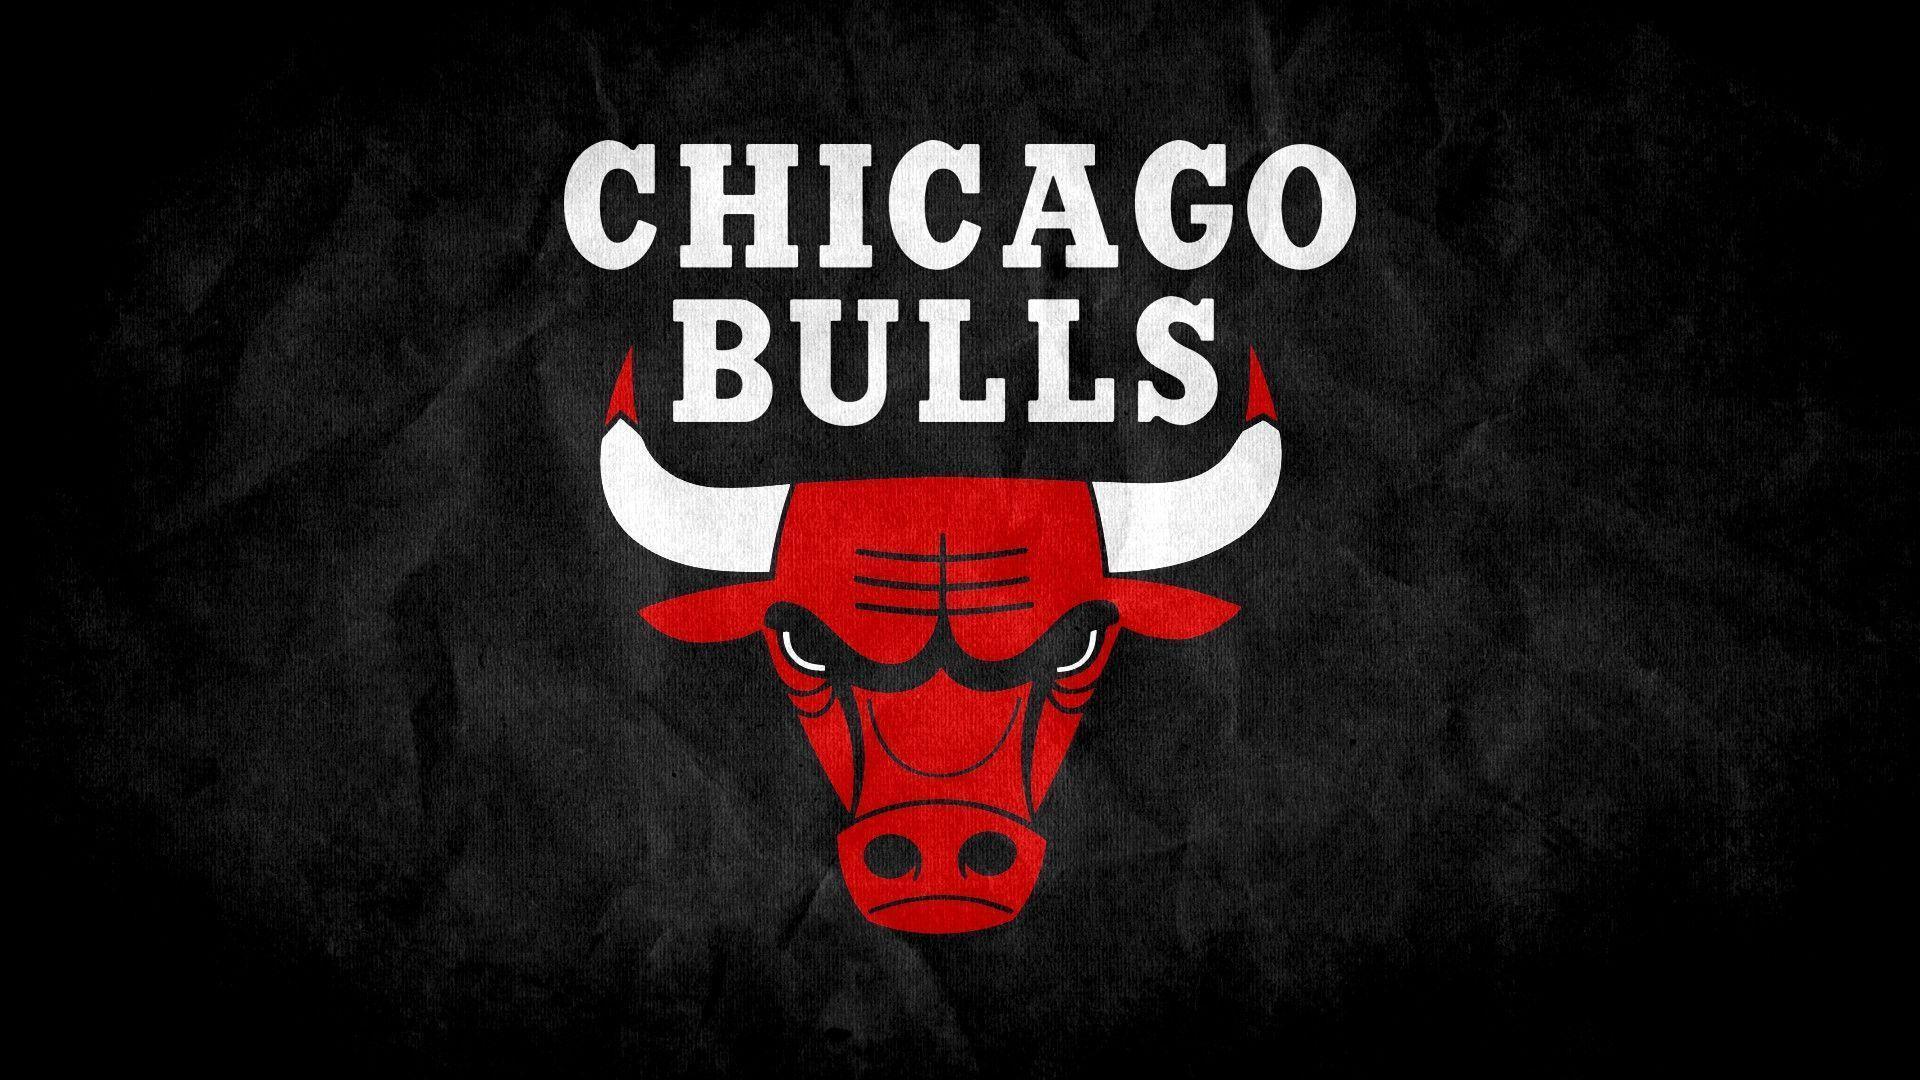 Who should the Chicago Bulls draft with the 20th pick?